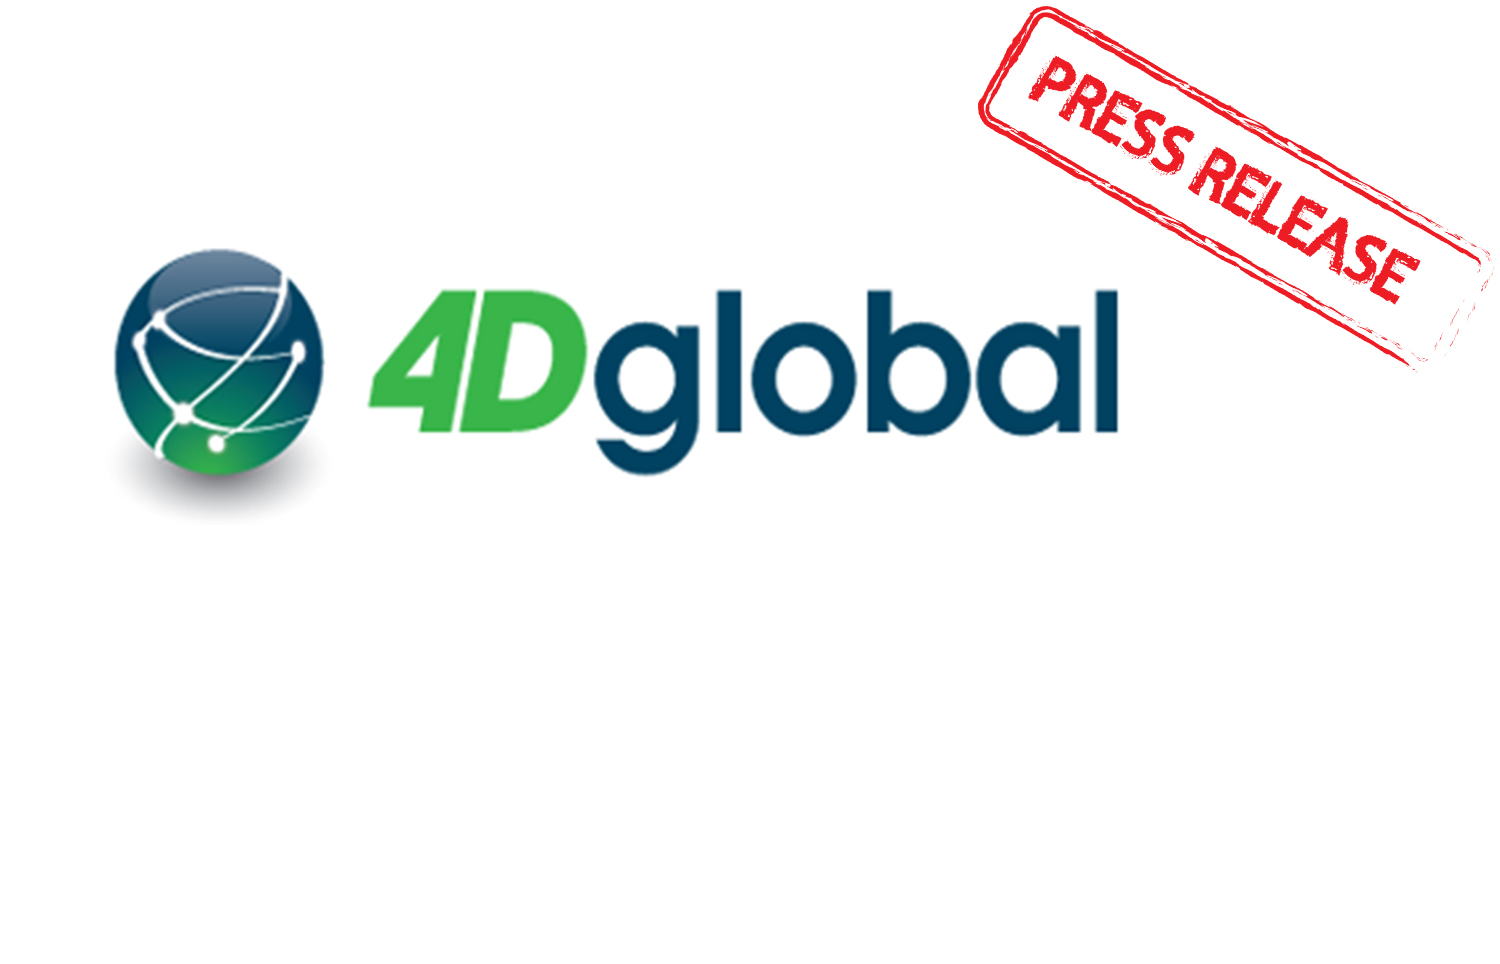 Applanix News 4dglobal To Provide Applanix Products And - 4dglobal to provide applanix products and solutions for land and air survey customers in australia and